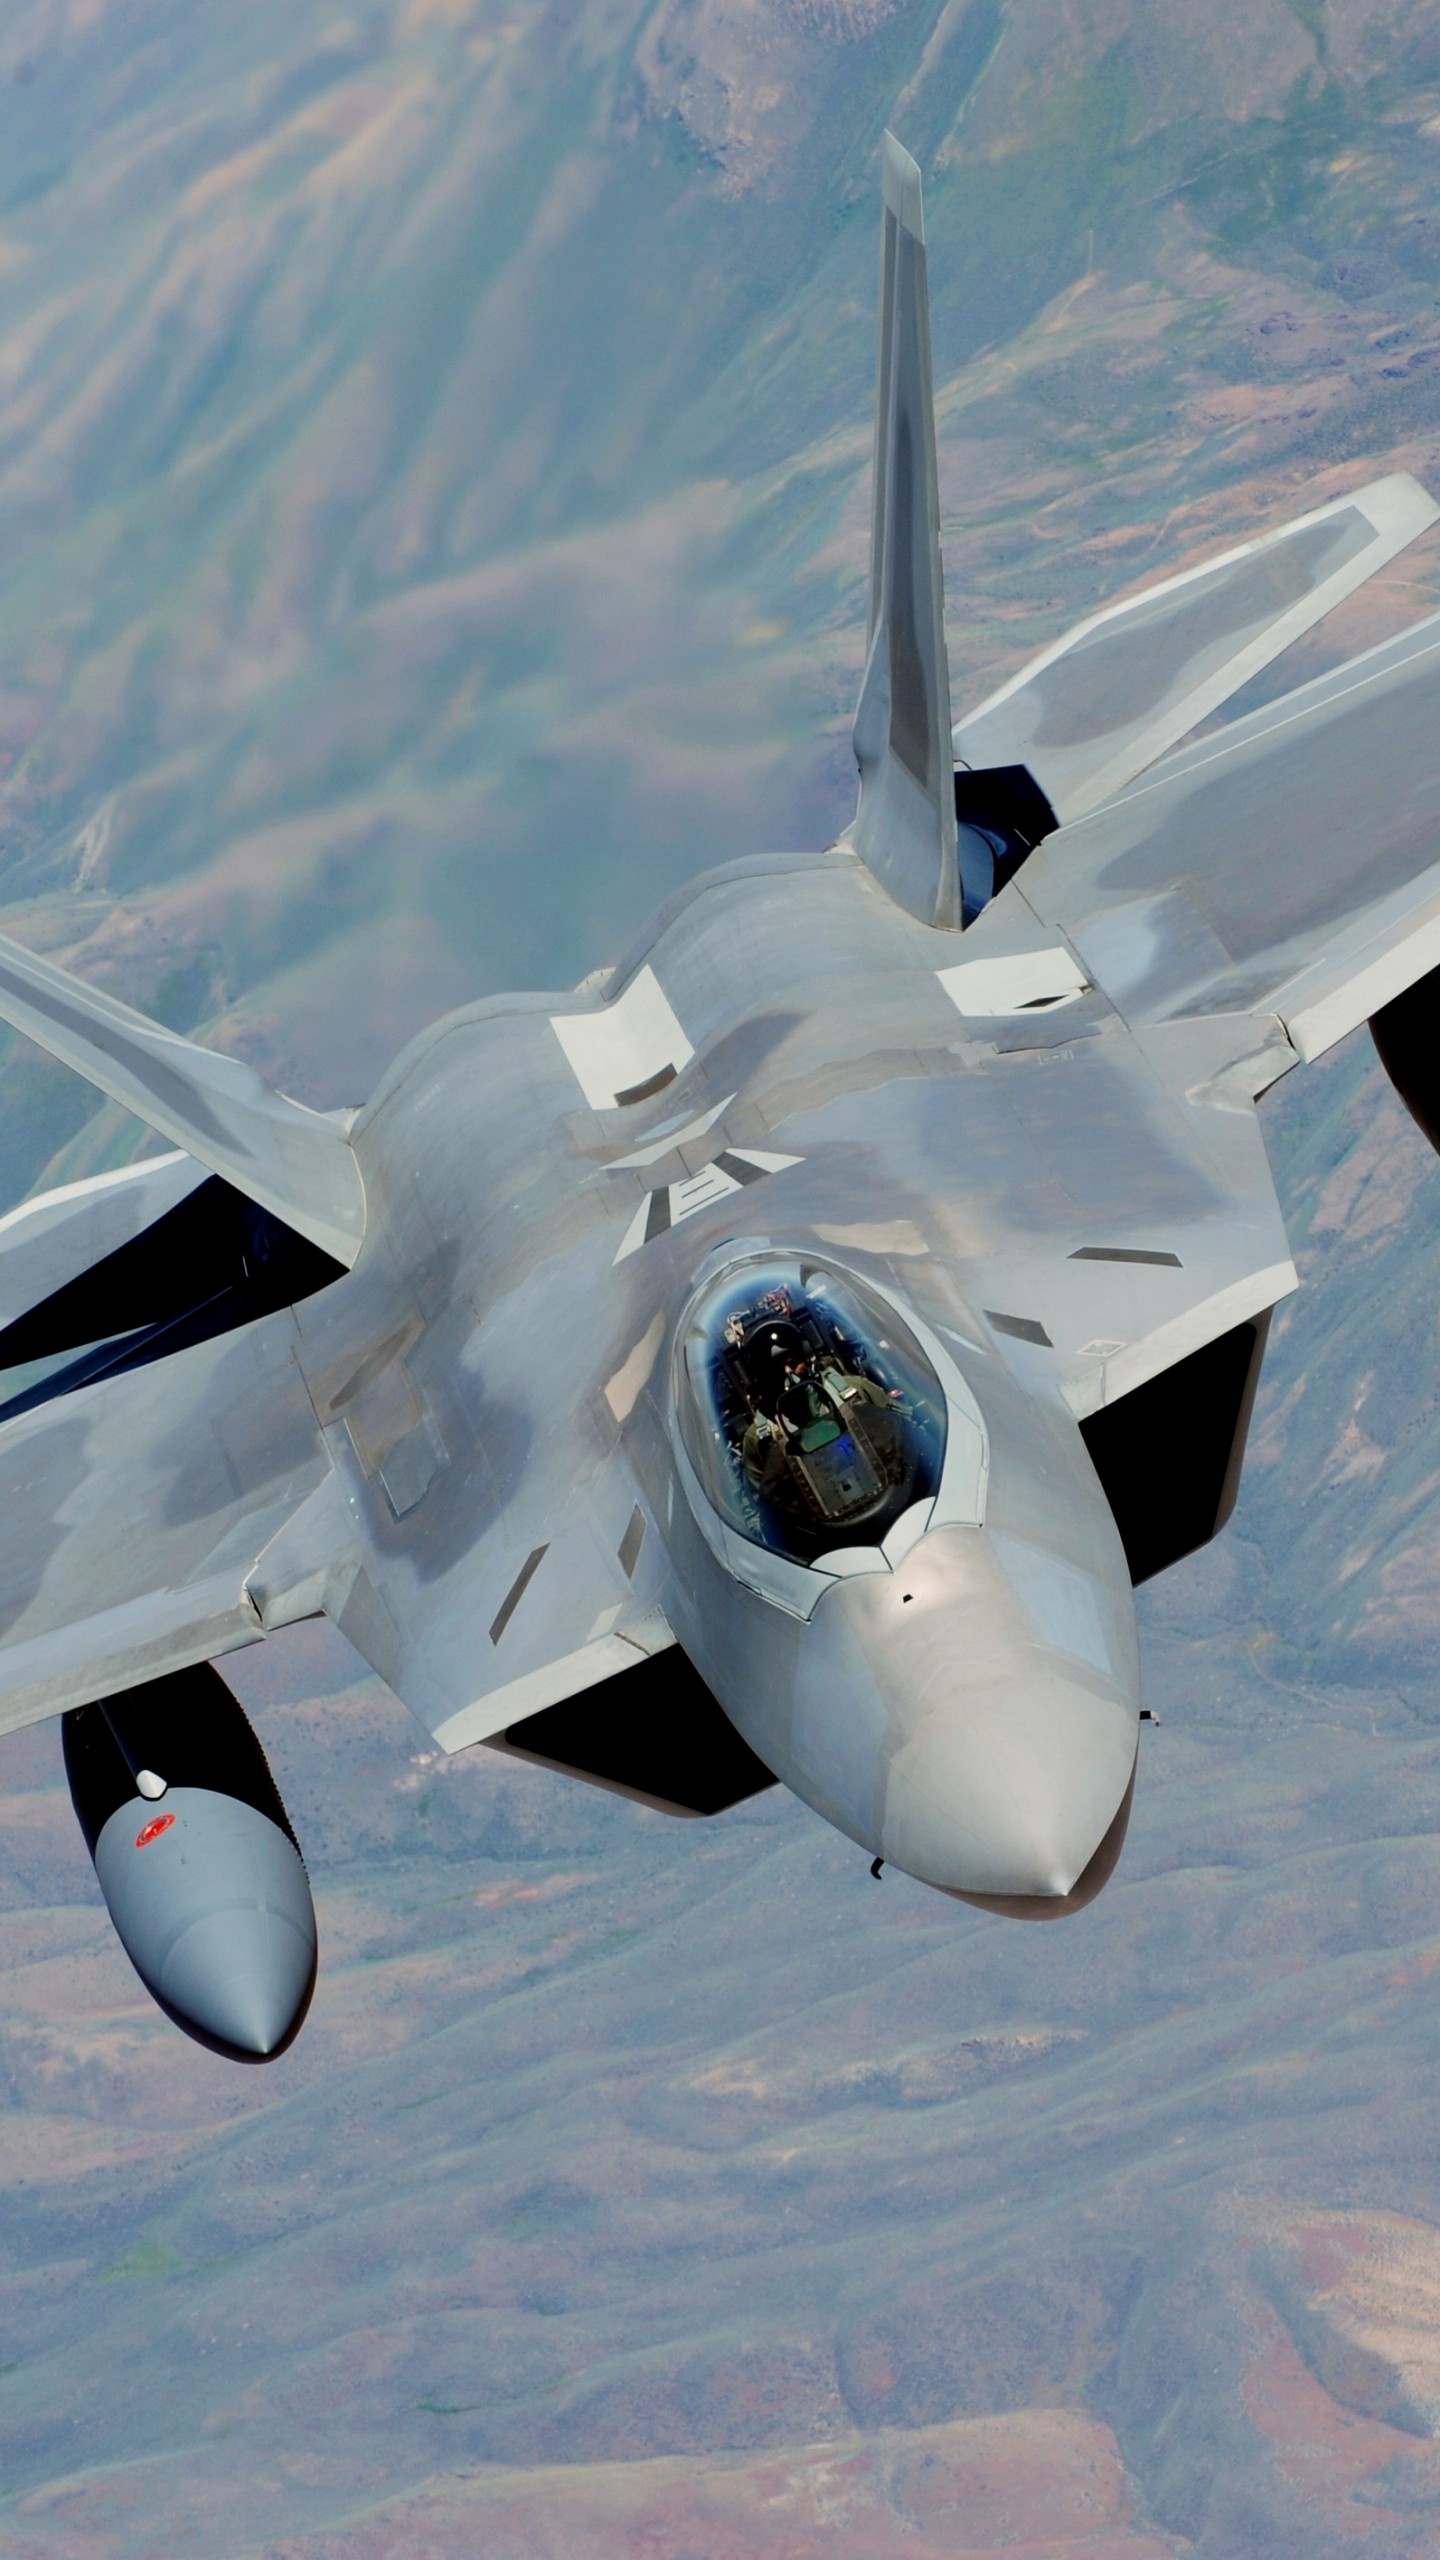 Wallpaper F-22, Raptor, Lockheed, Martin, stealth, air superiority fighter,Air Force, mountain, Military #1670 1440x2560